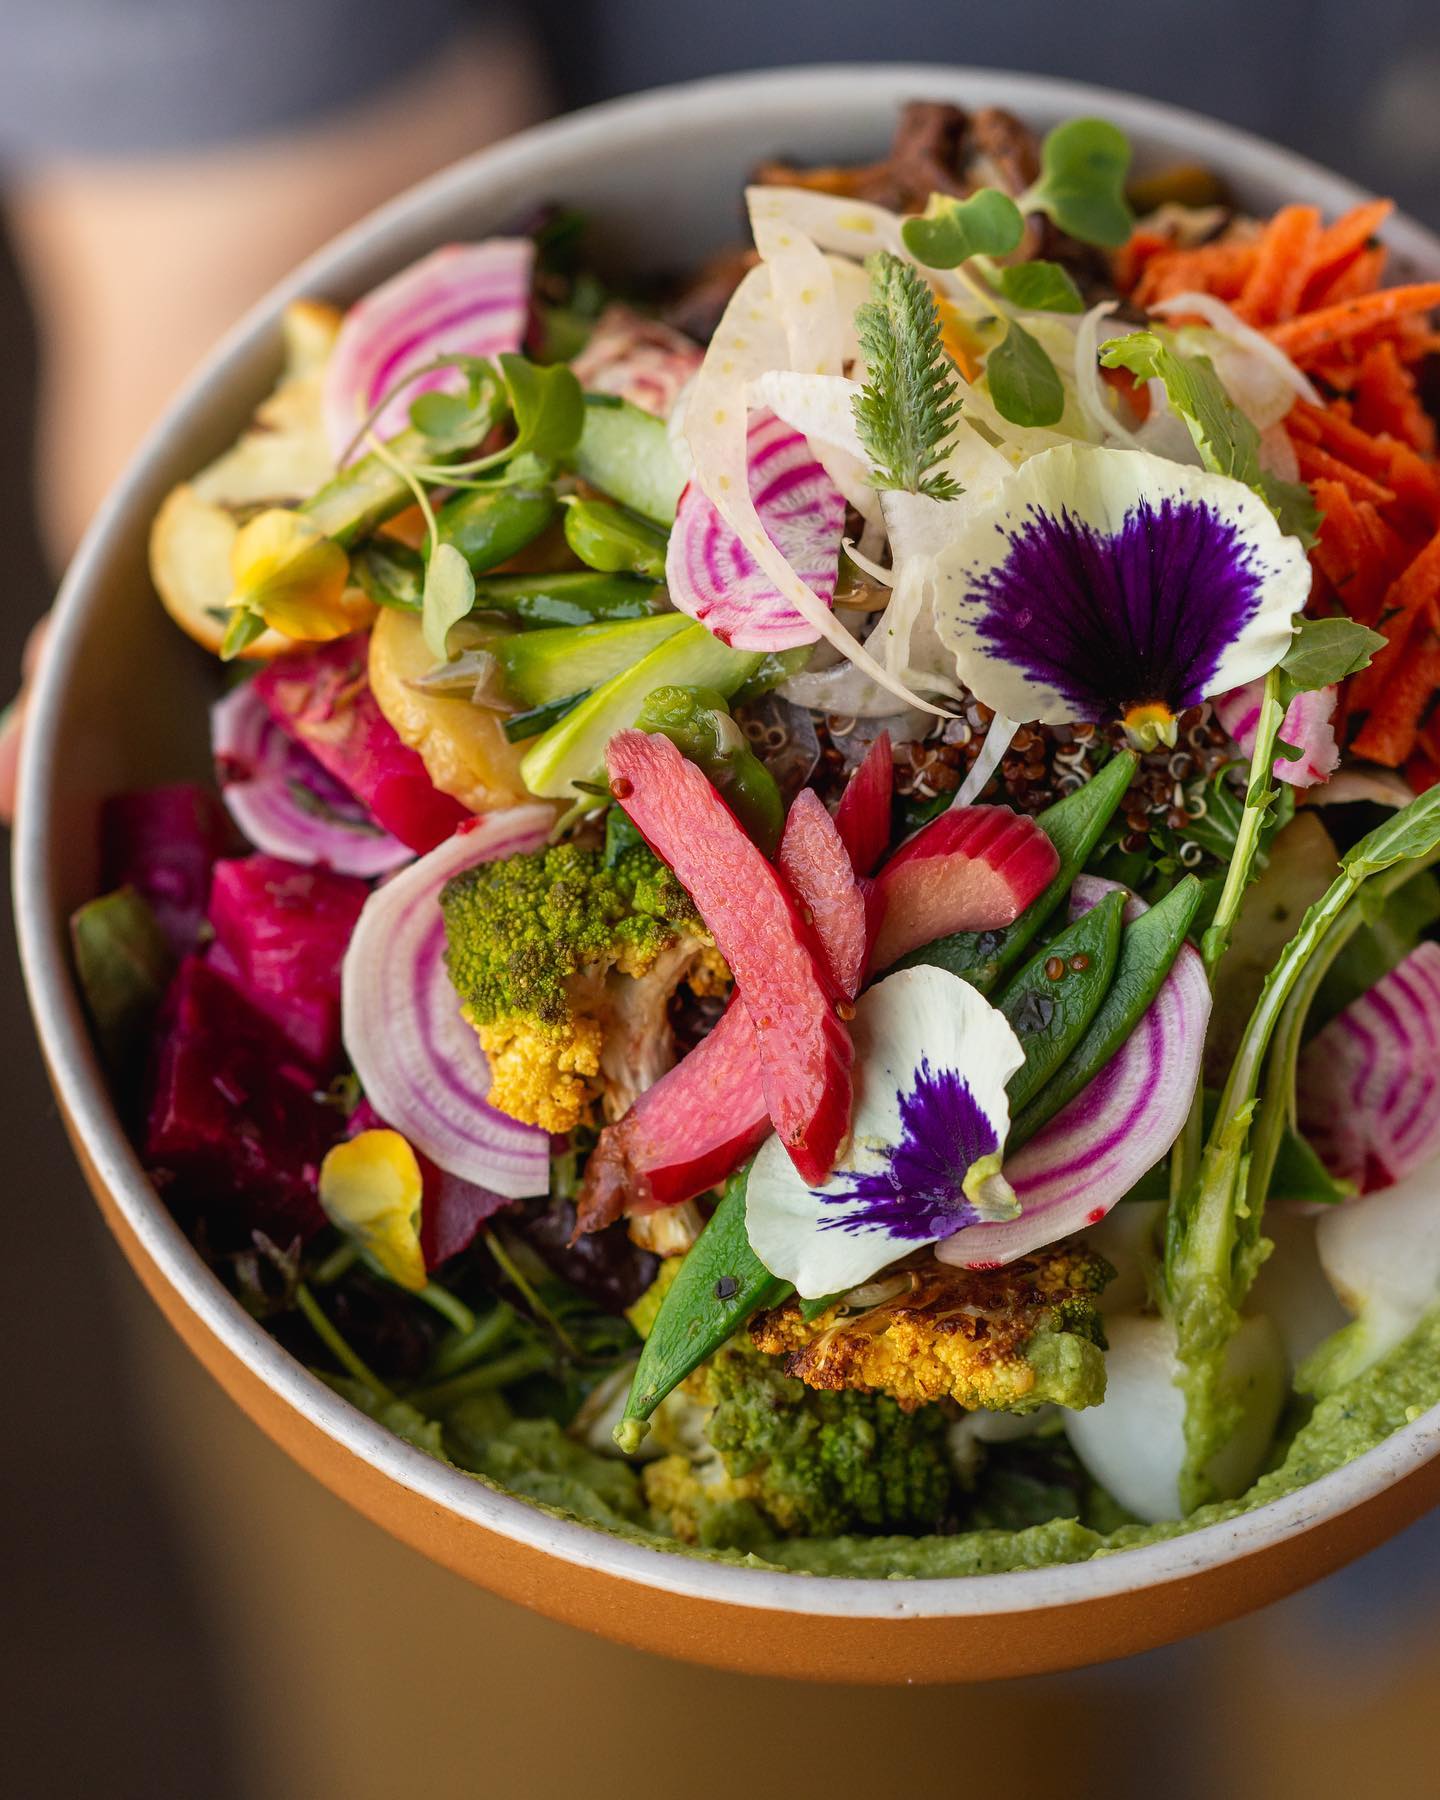 A picture of a Sugarpine Salad with pickled rhubarb, snap peas, radishes, and edible flowers.